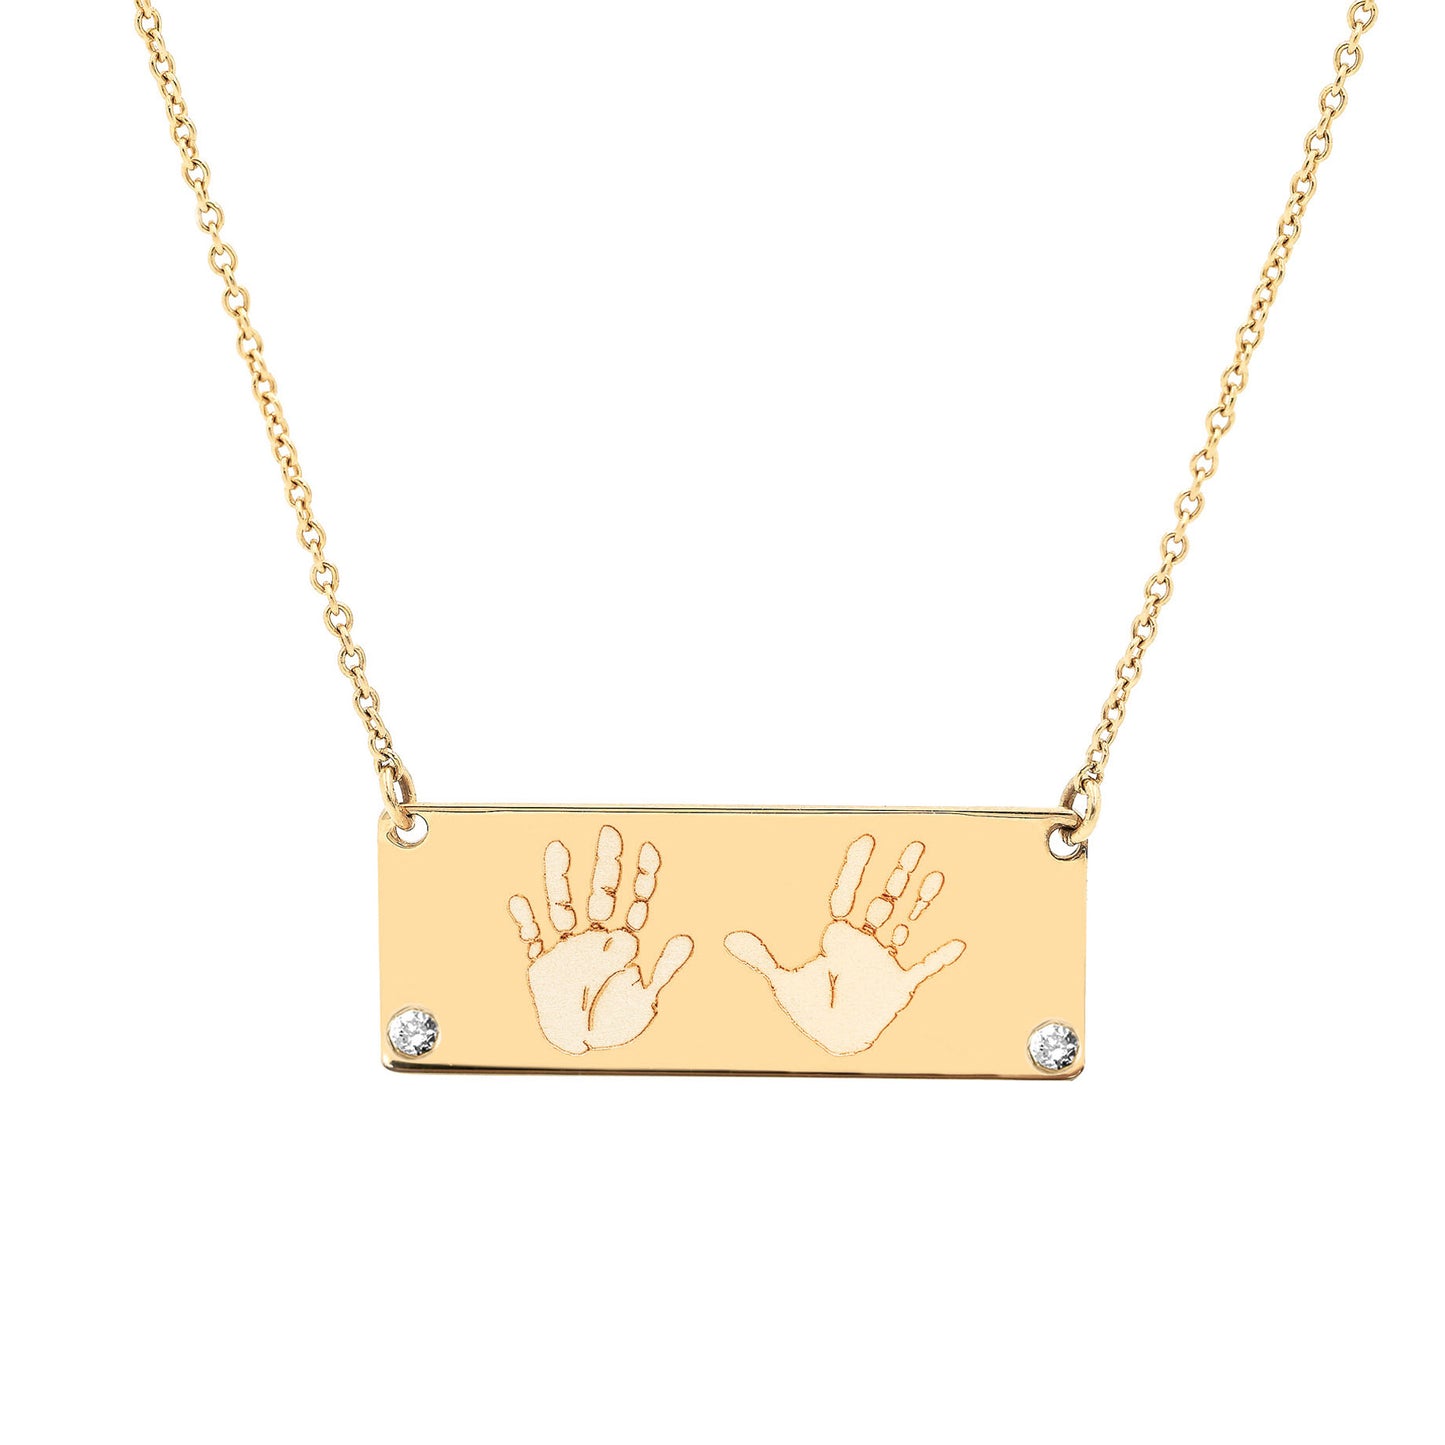 Handprints / Footprints Small Bar Necklace in 14K Gold with Diamonds